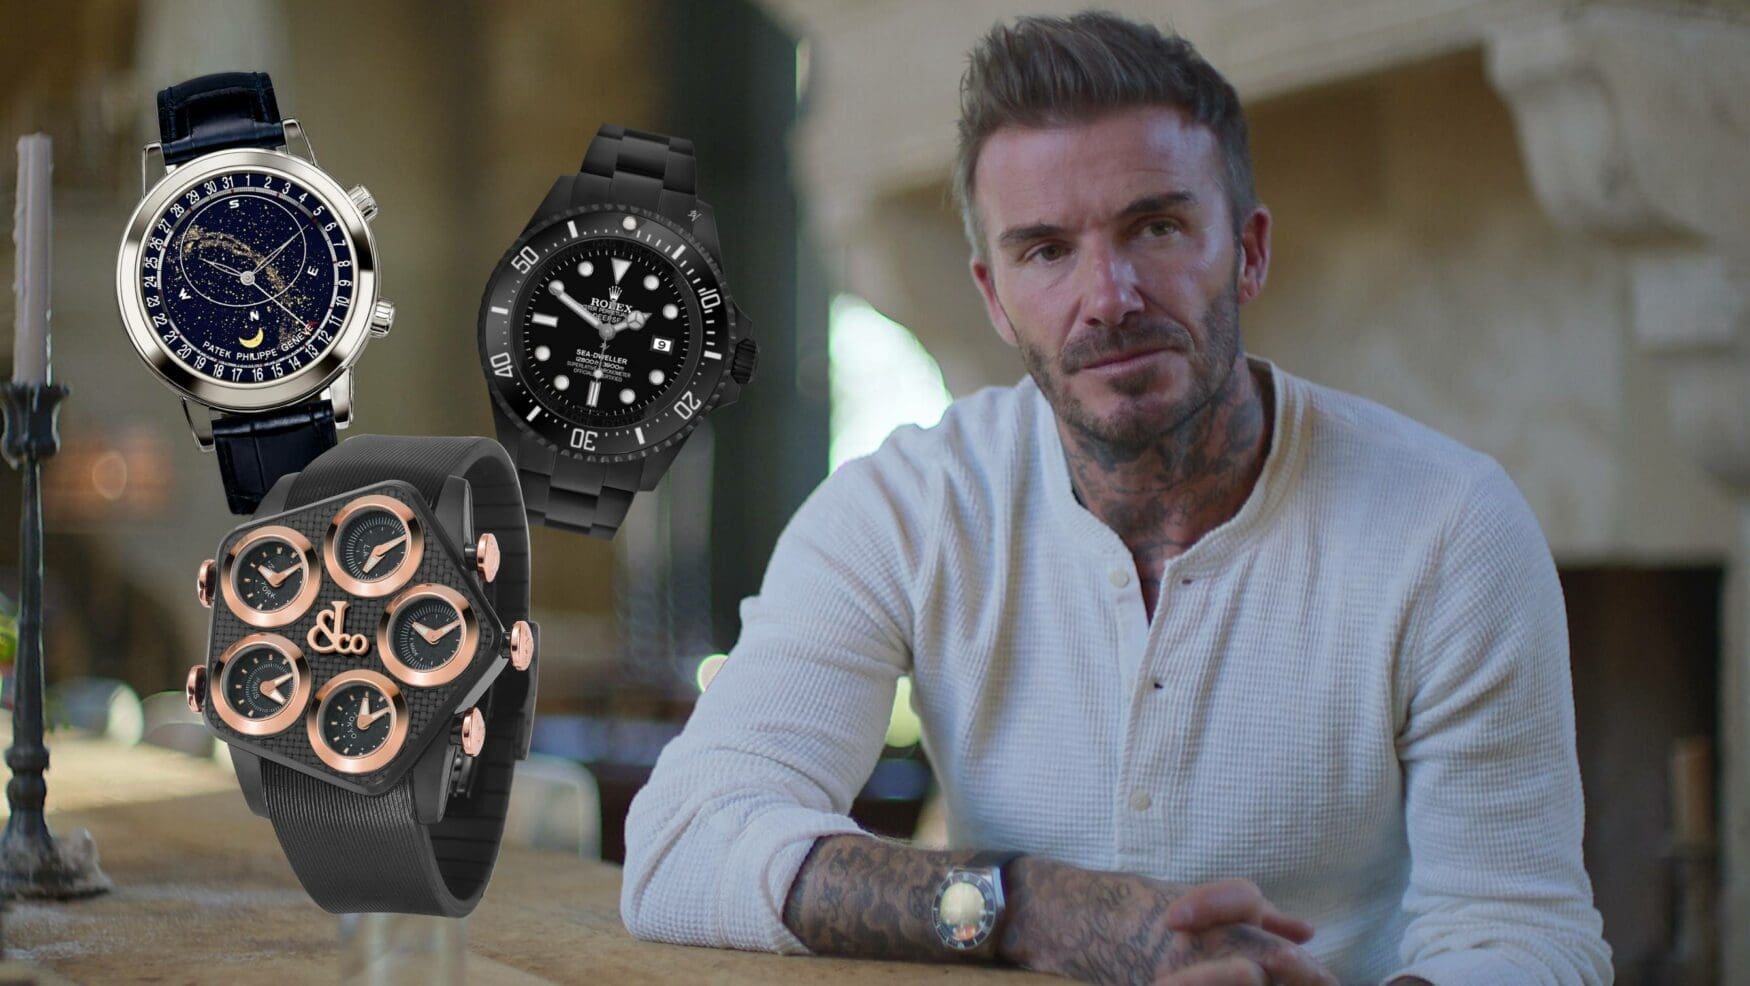 The most interesting watches in David Beckham’s collection